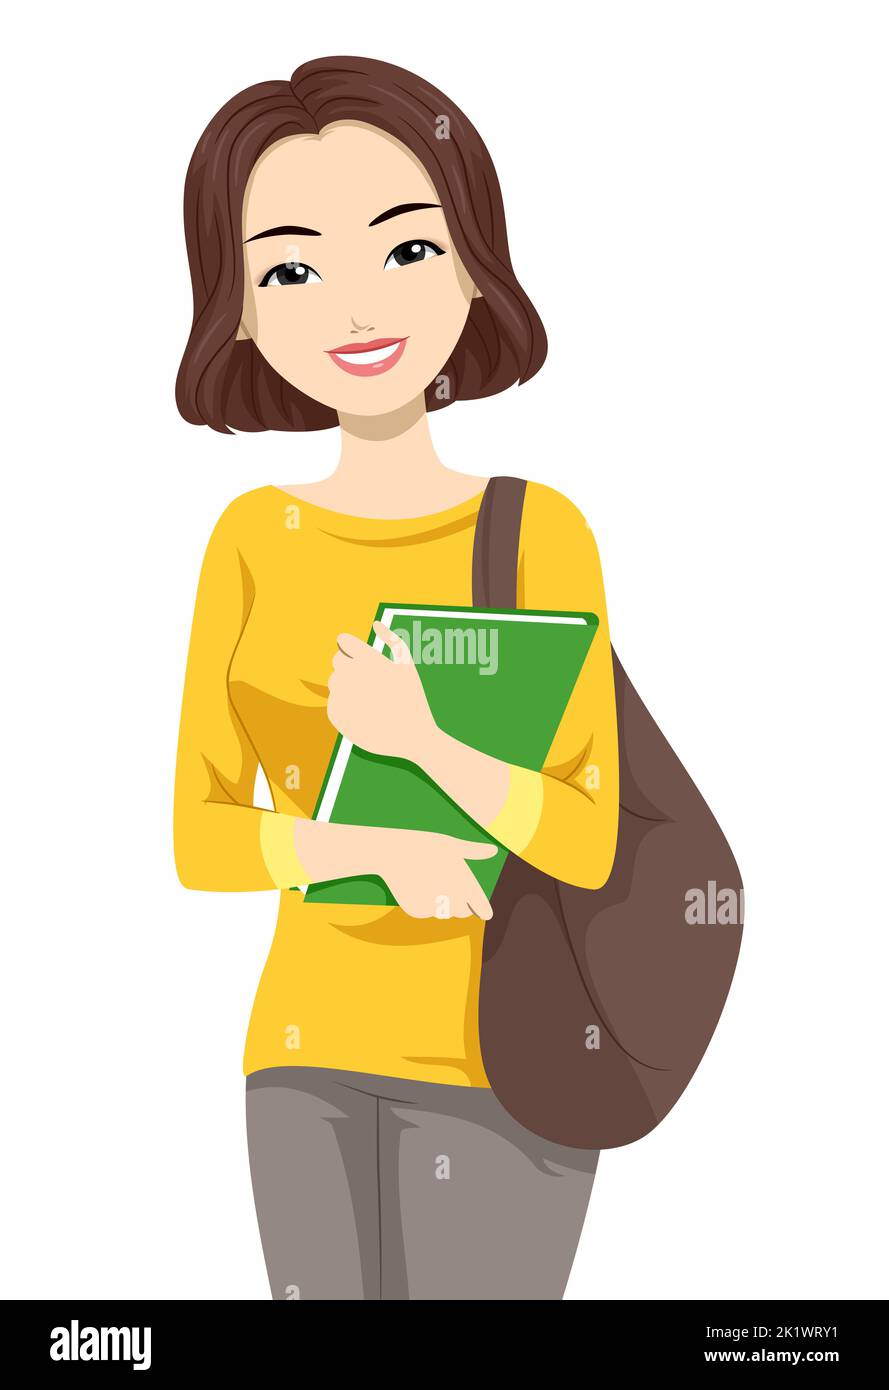 Illustration of East Asian Teen Girl Student with School Bag and a Book Stock Photo